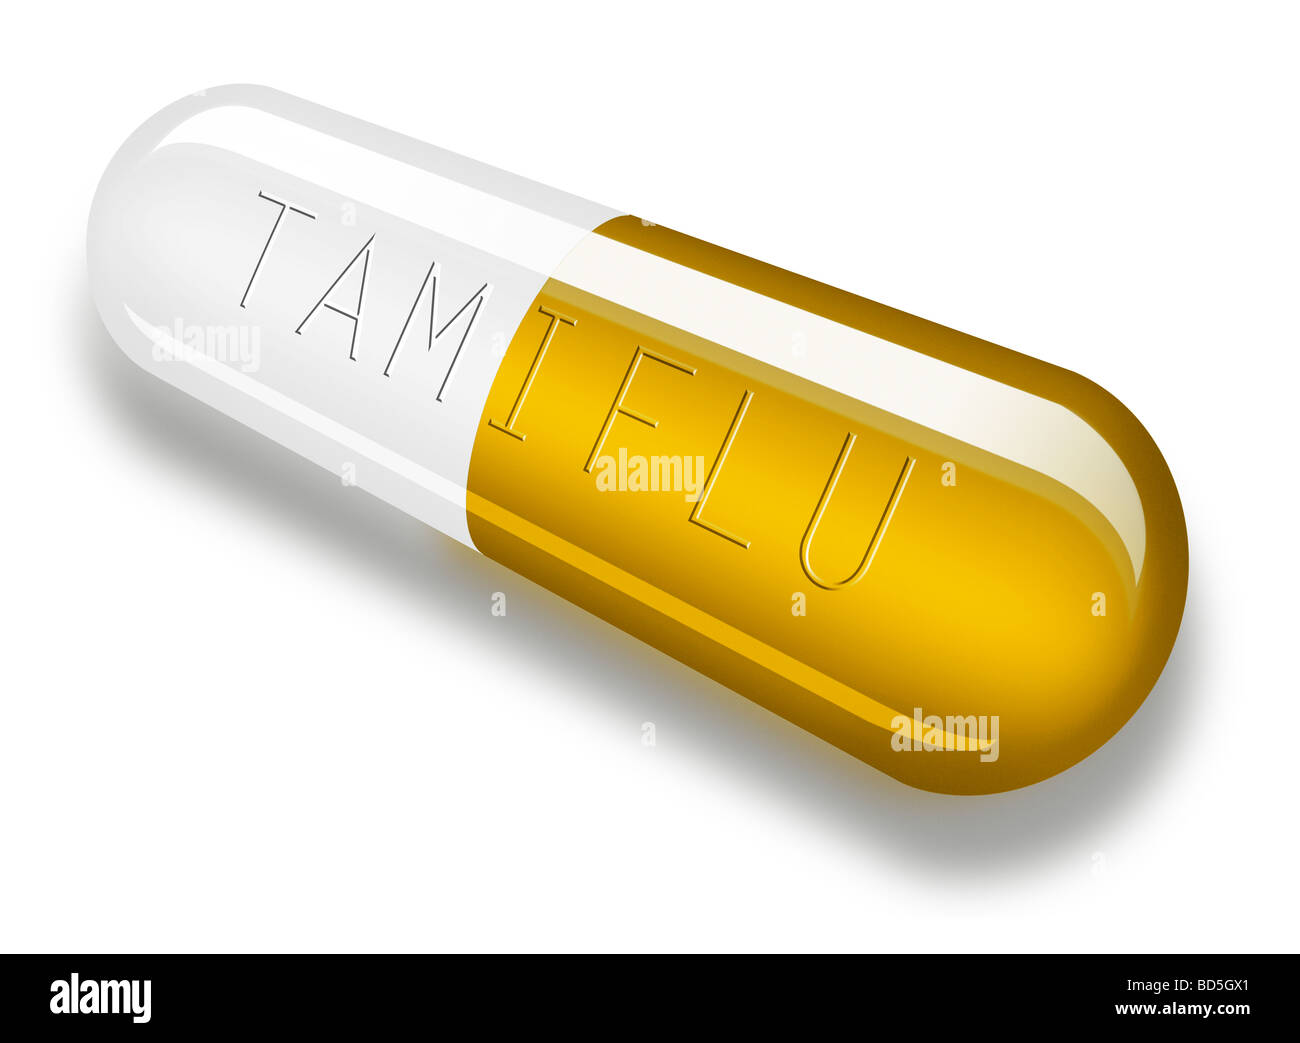 Illustration of a single Tamiflu Capsule with TAMIFLU embossed on it.  Medication for Swine and Bird Flu Stock Photo